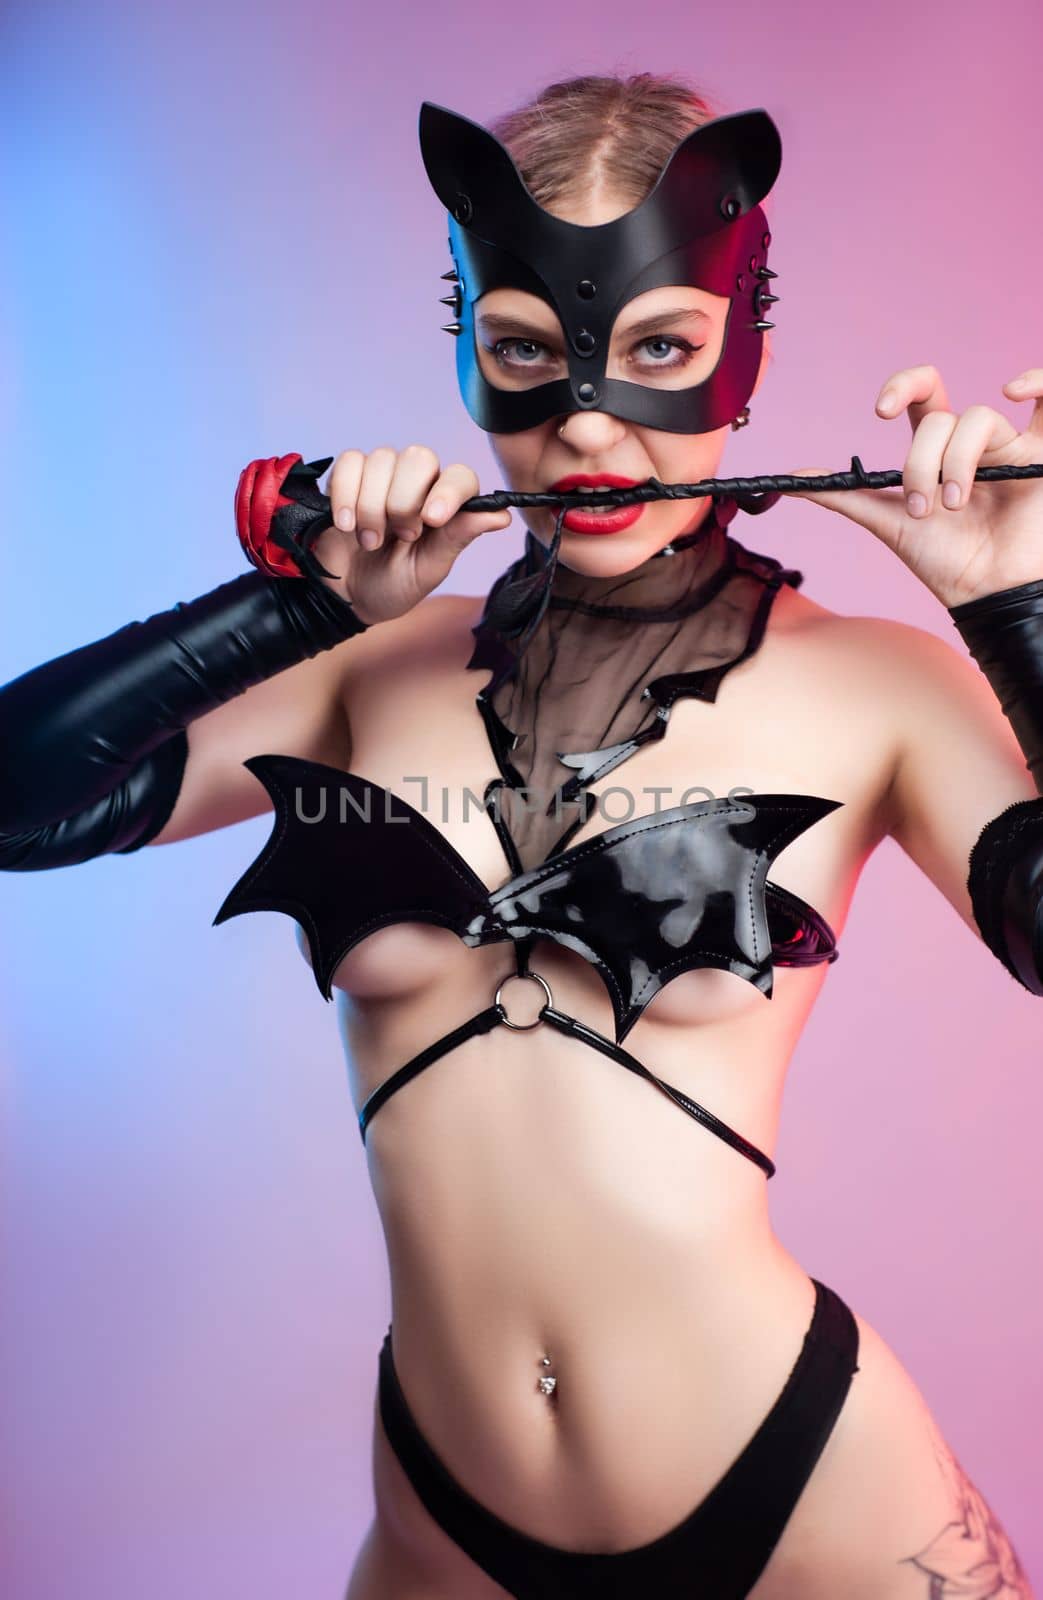 Sexy girl in bdsm underwear leather mask and leather rose for bdsm games costume for sex games on pink bright background copy paste